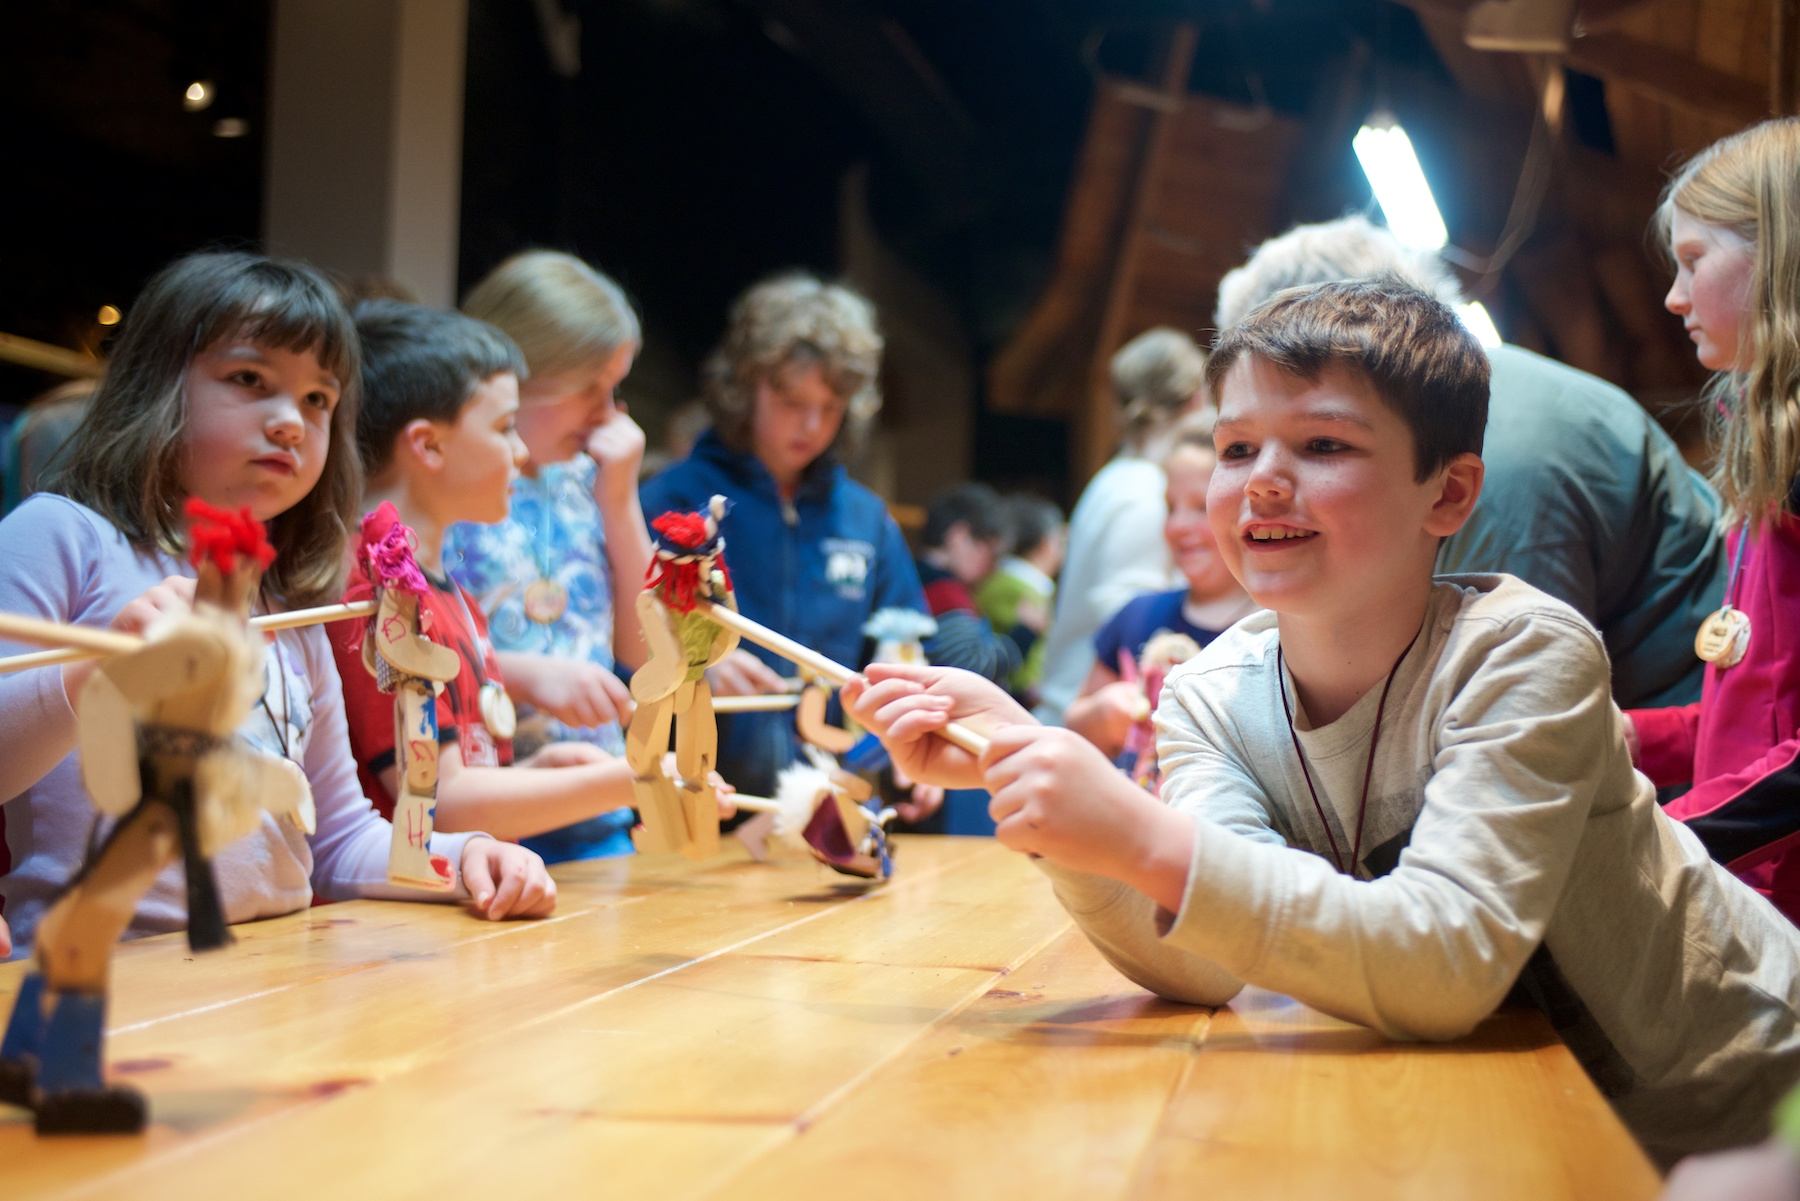 A young boy smiles while making his wooden limberjack toy that he decorated dance. He is surrounded by other children playing with their own limberjack toys.